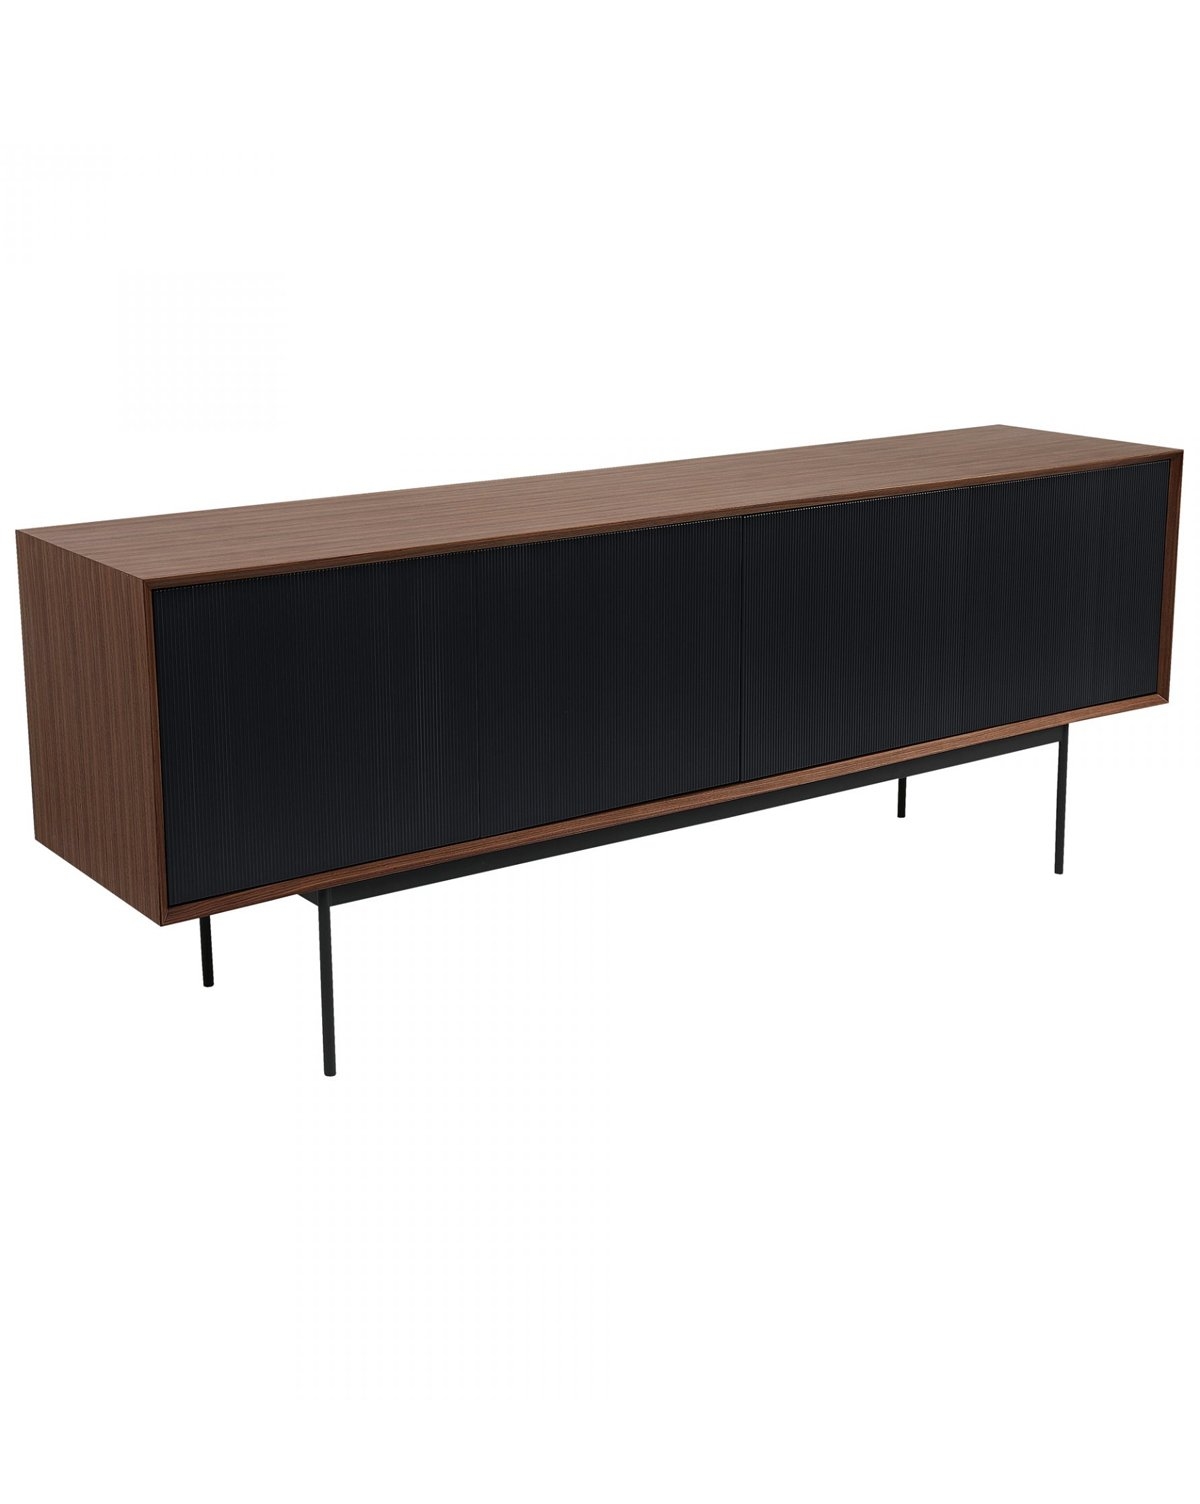 ANDREW SIDEBOARD - Image 2